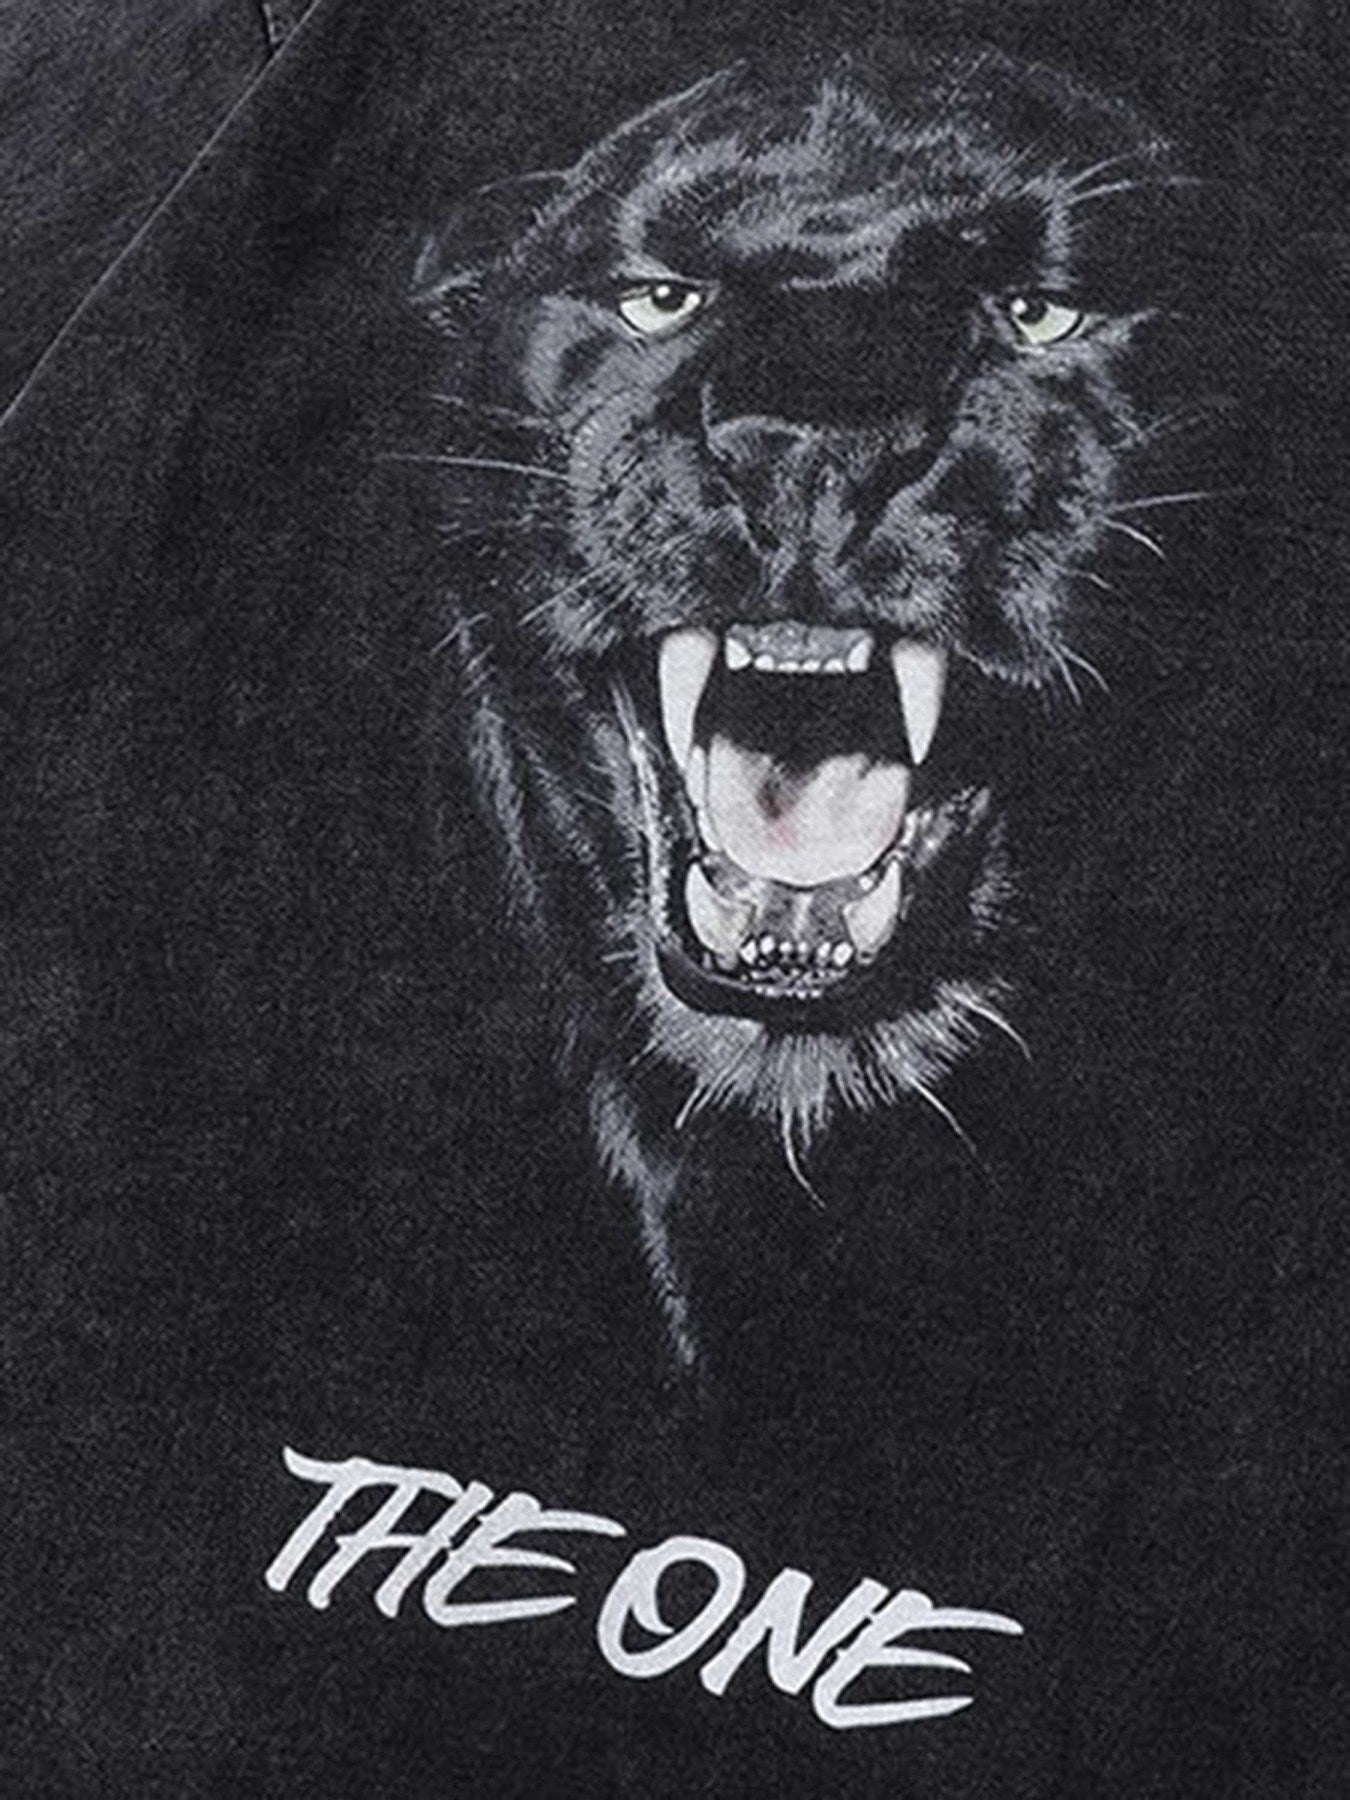 The Supermade Black Panther Print T-shirt